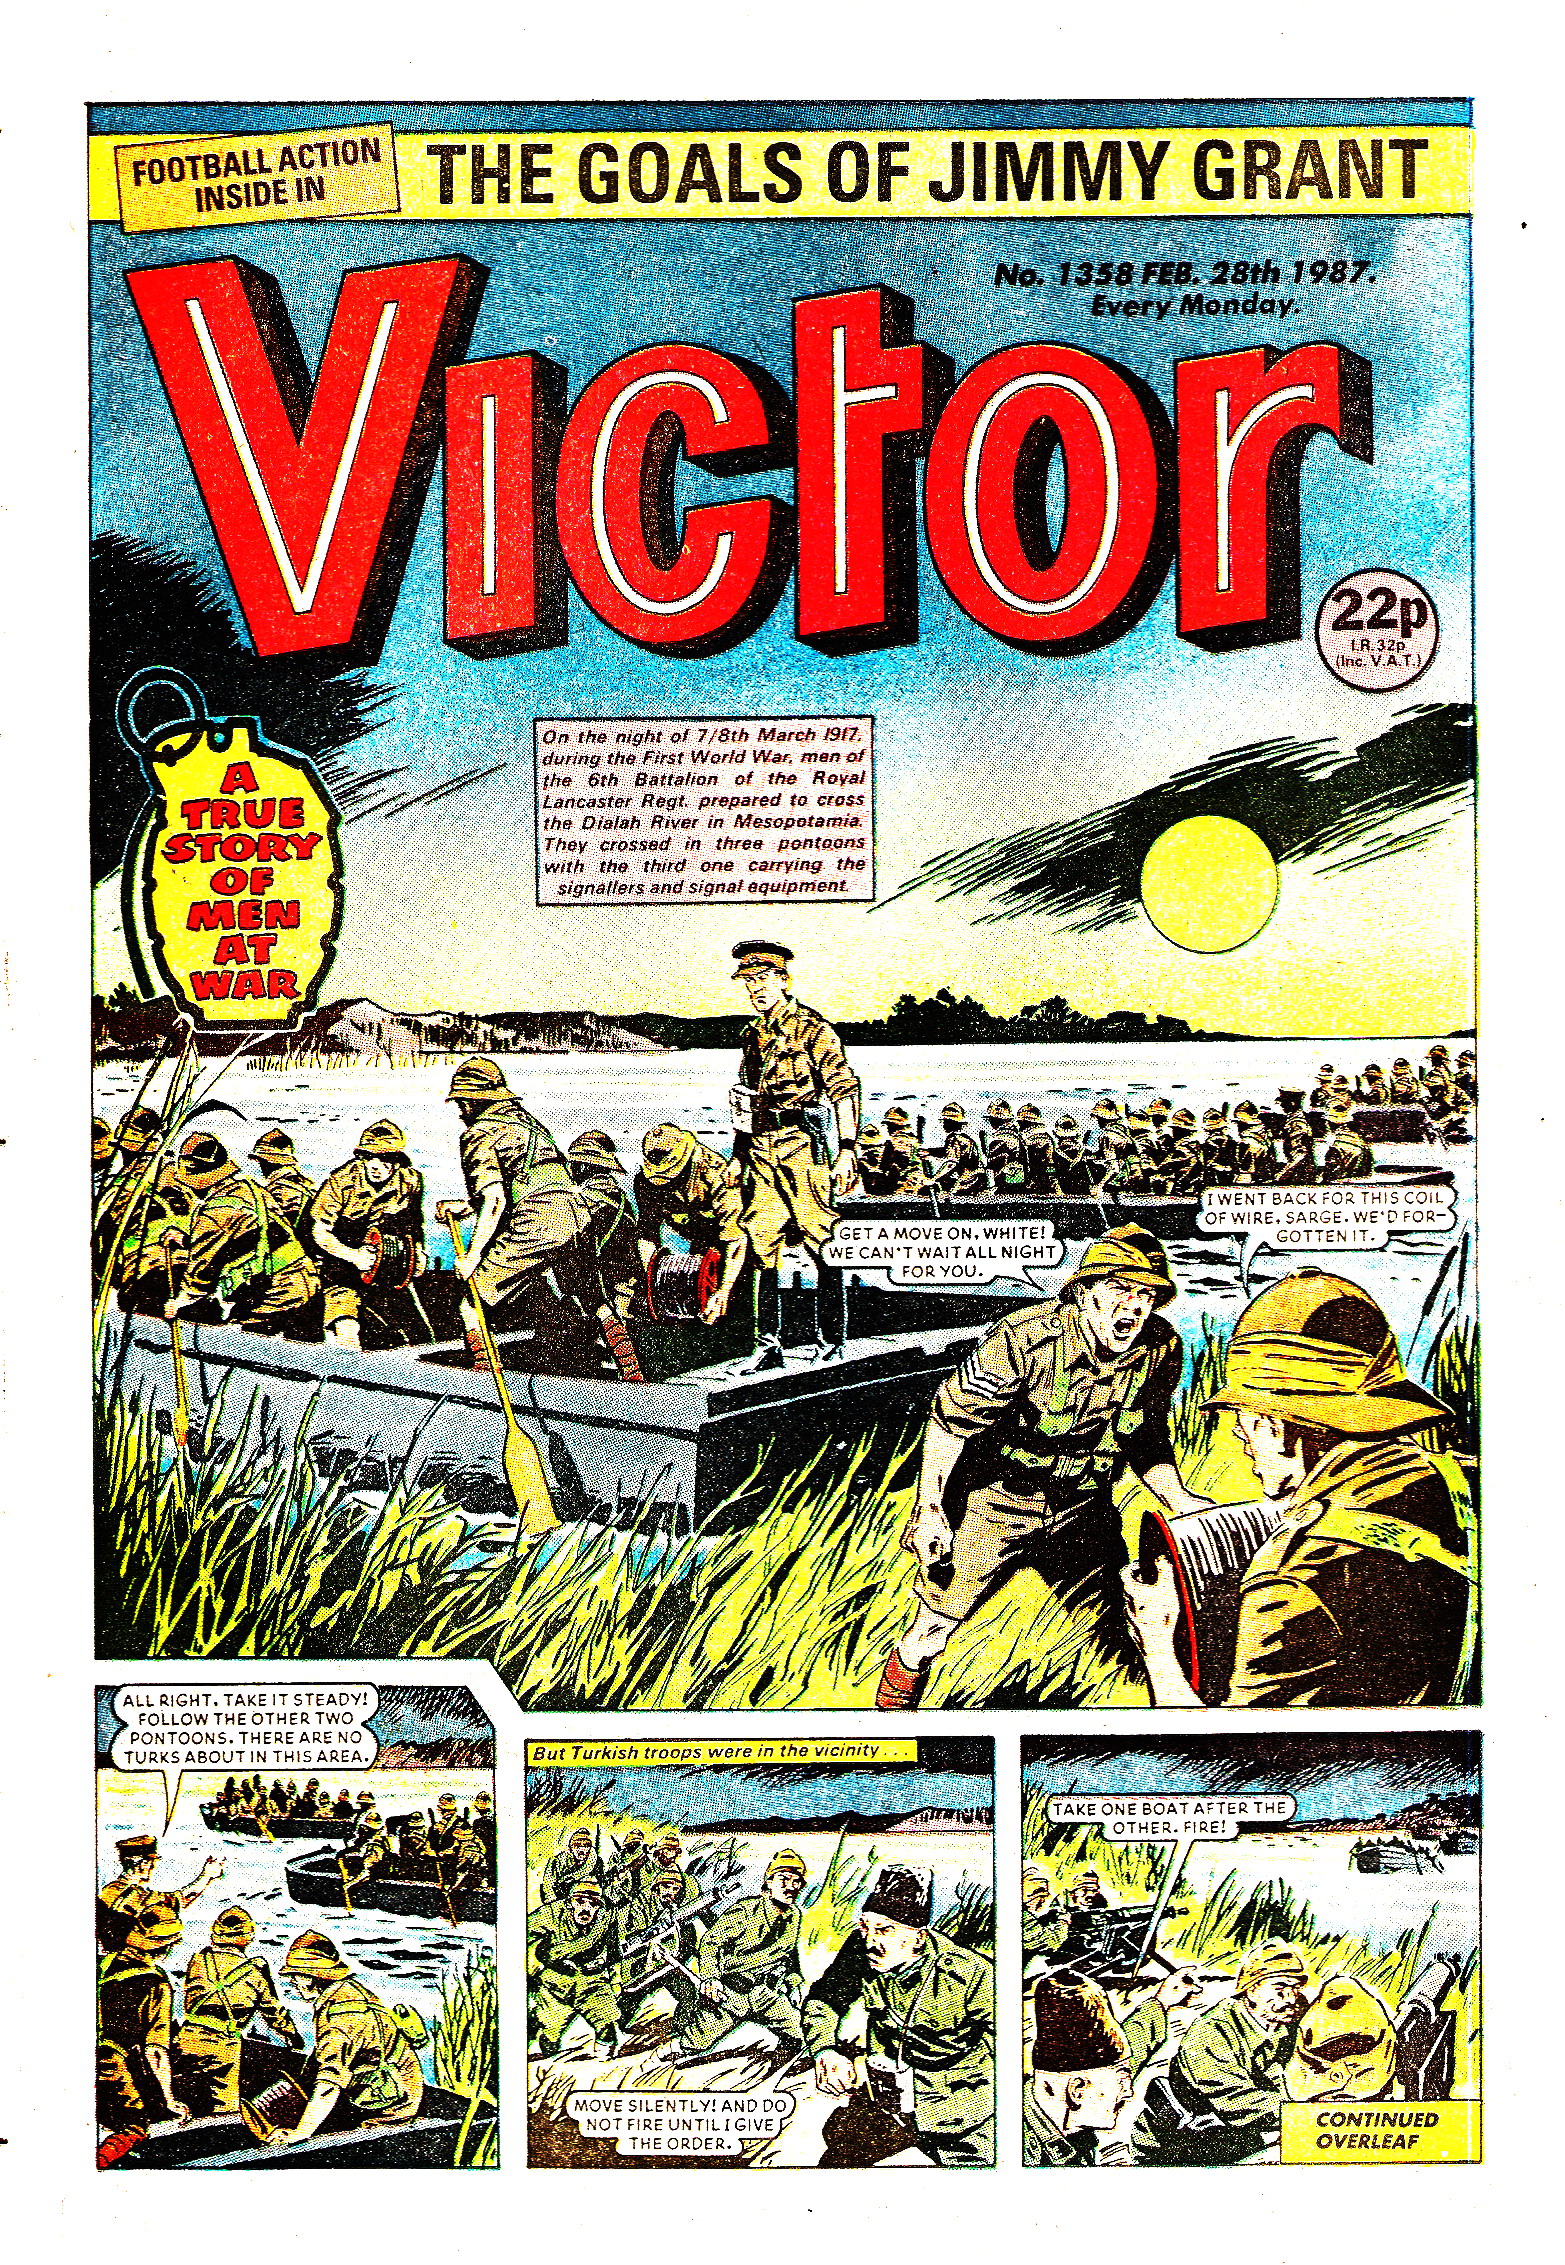 Victor (Issue 1358 - KIng's Own Story - Cover